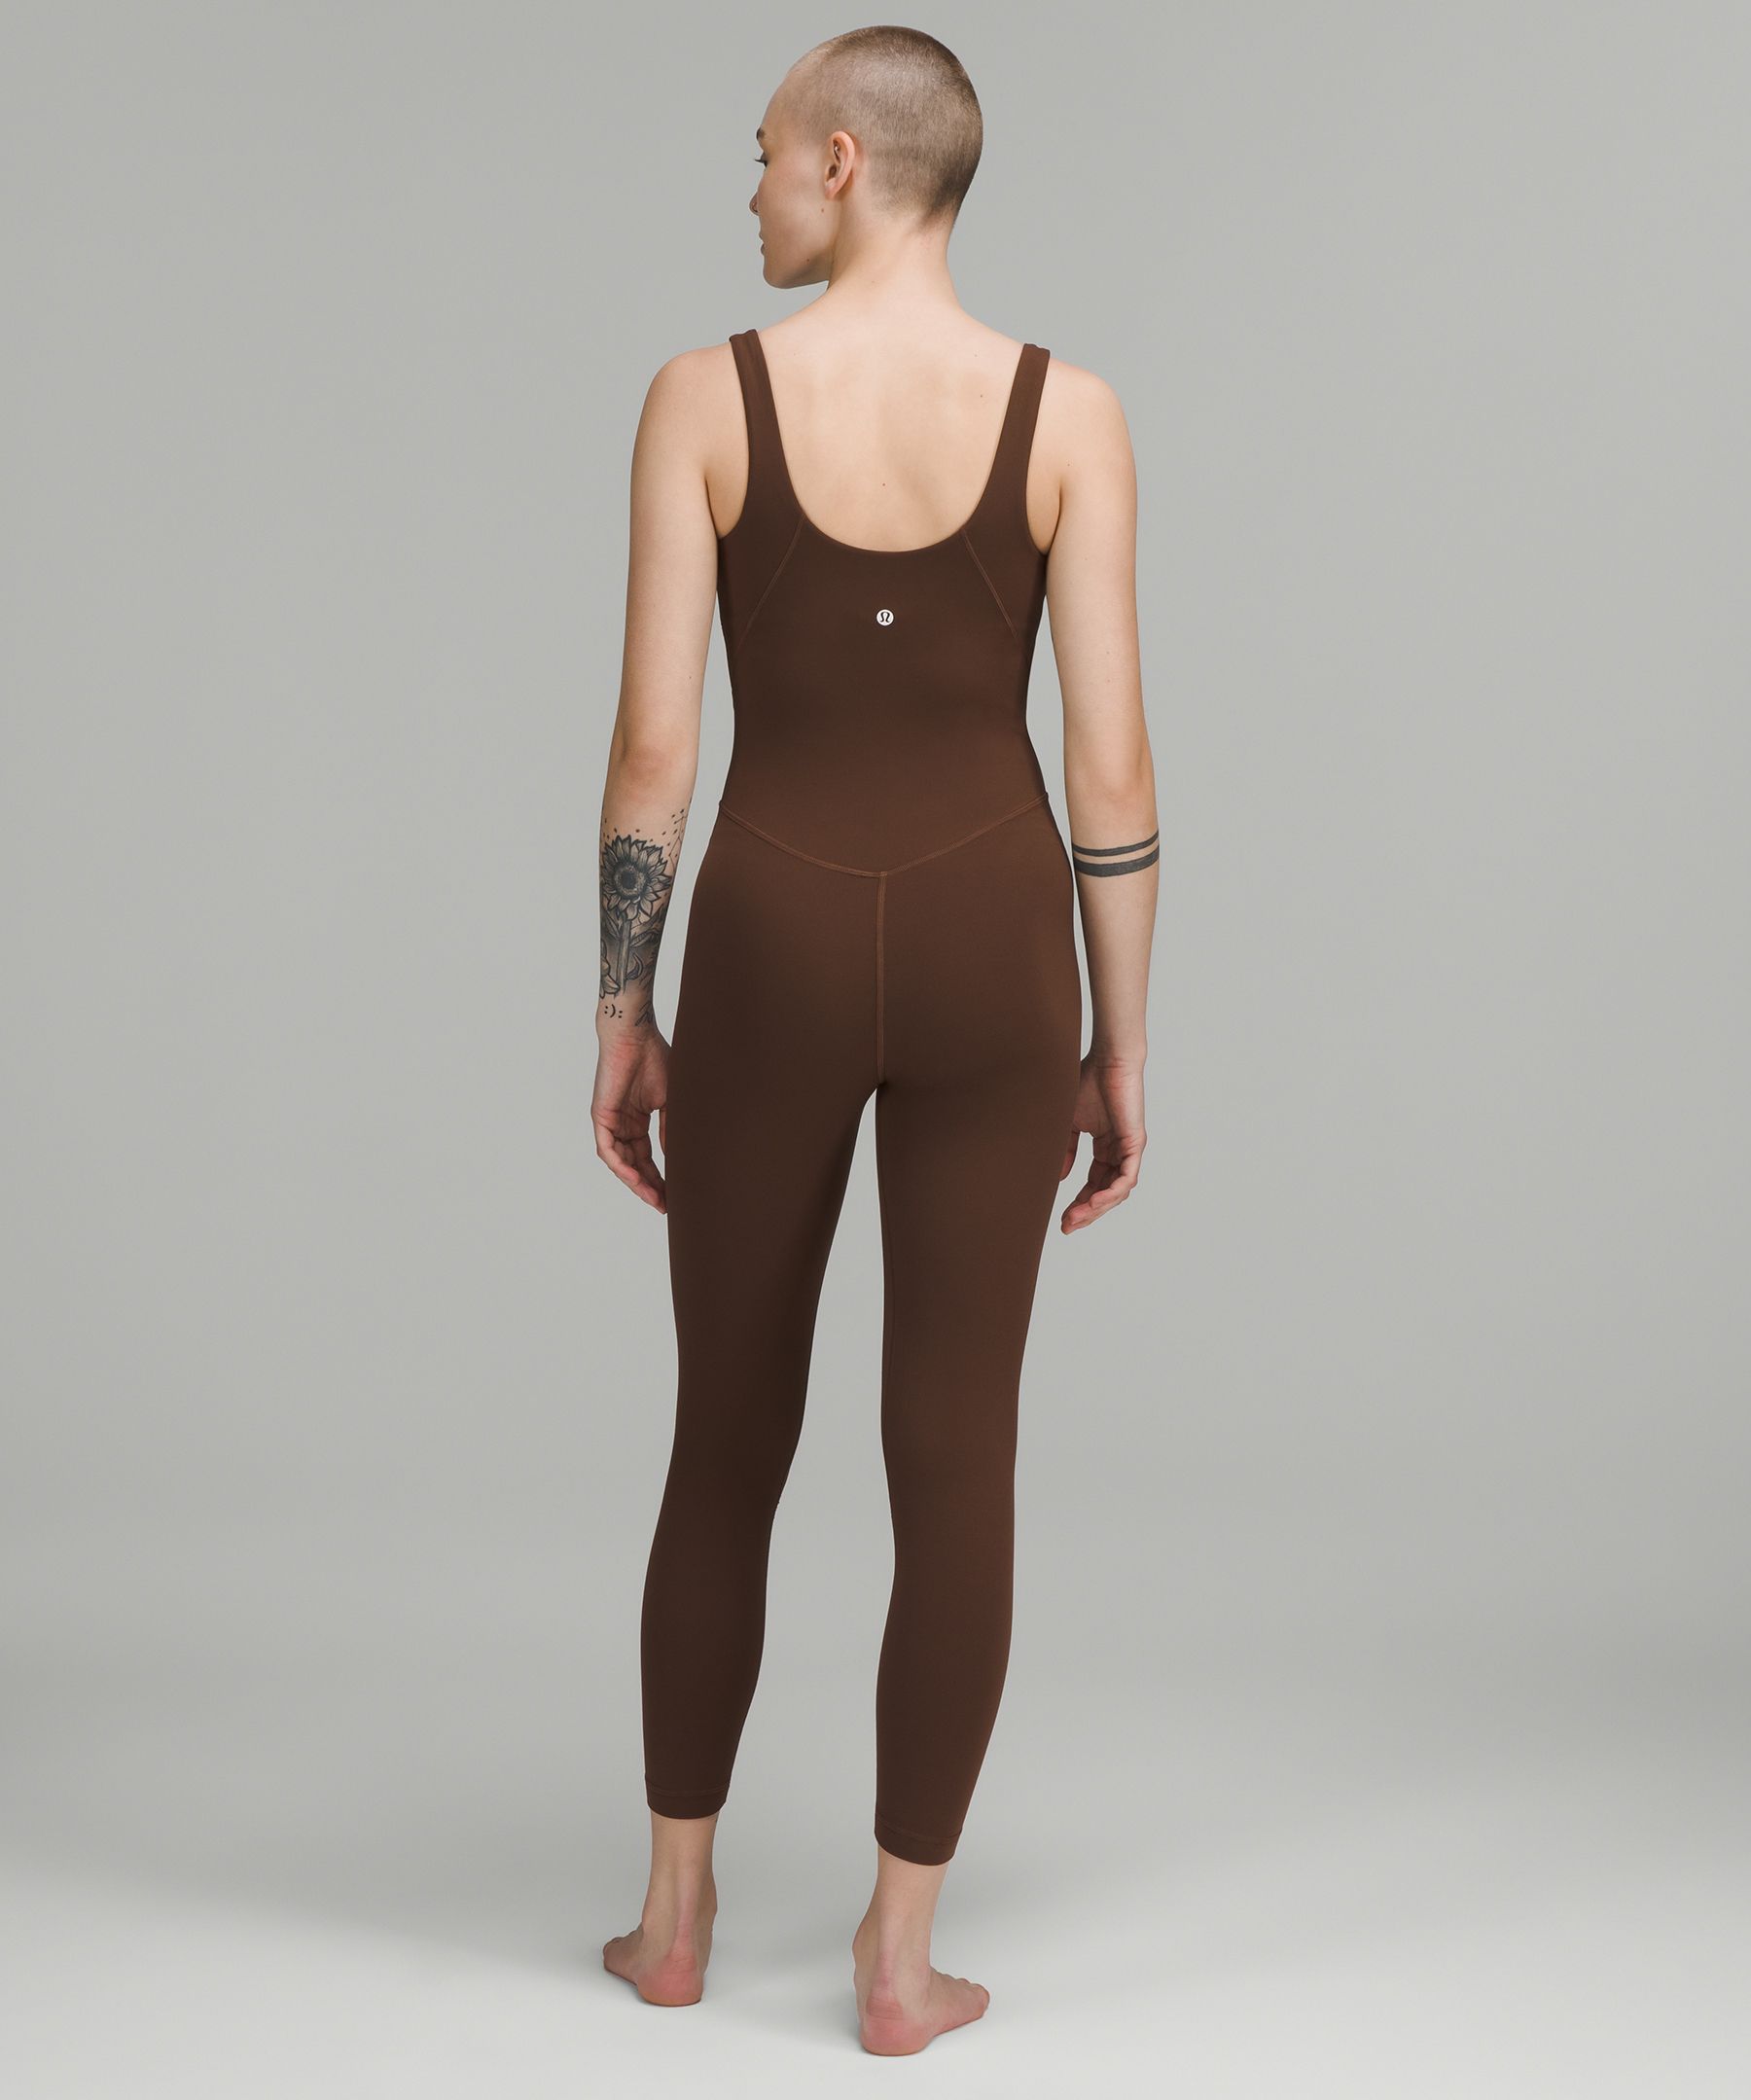 10/10 on the lululemon bodysuits 😍✨ FIT IS THE ALIGN BODY SUIT IN SMOKE  SPRUCE, SIZE 4 🤌🏼🔥Faint lavender and pink peony are both still in stock  on markdown! : r/lululemon